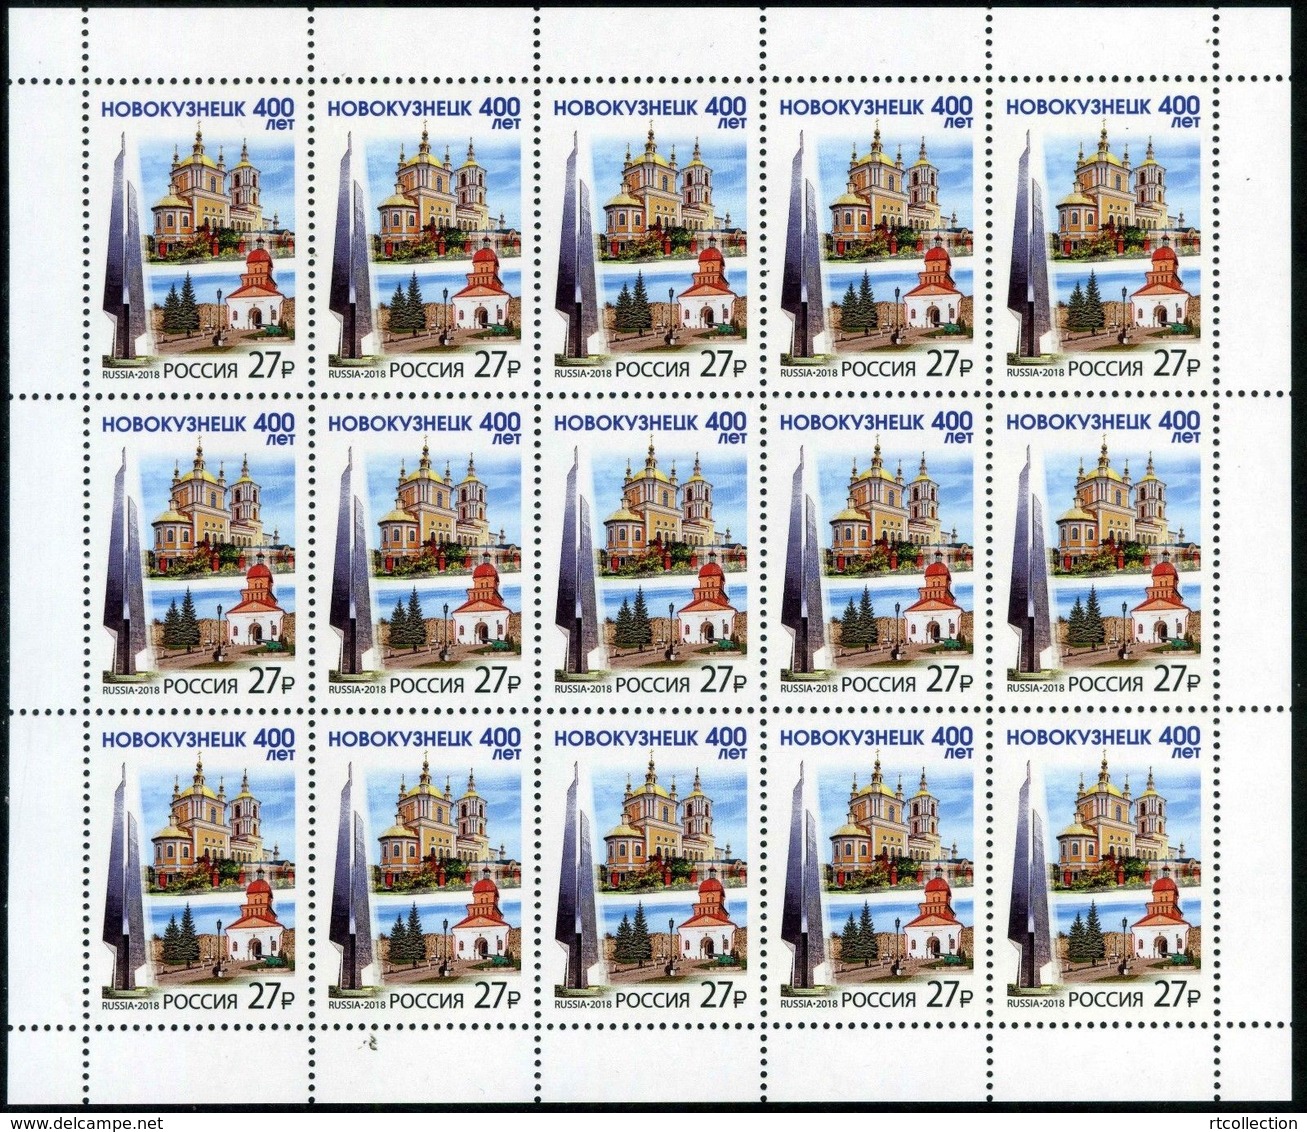 Russia 2018 Sheet 400th Anniversary City Novokuznetsk Places Regions Celebrations Architecture Church Tourism Stamps MNH - Churches & Cathedrals